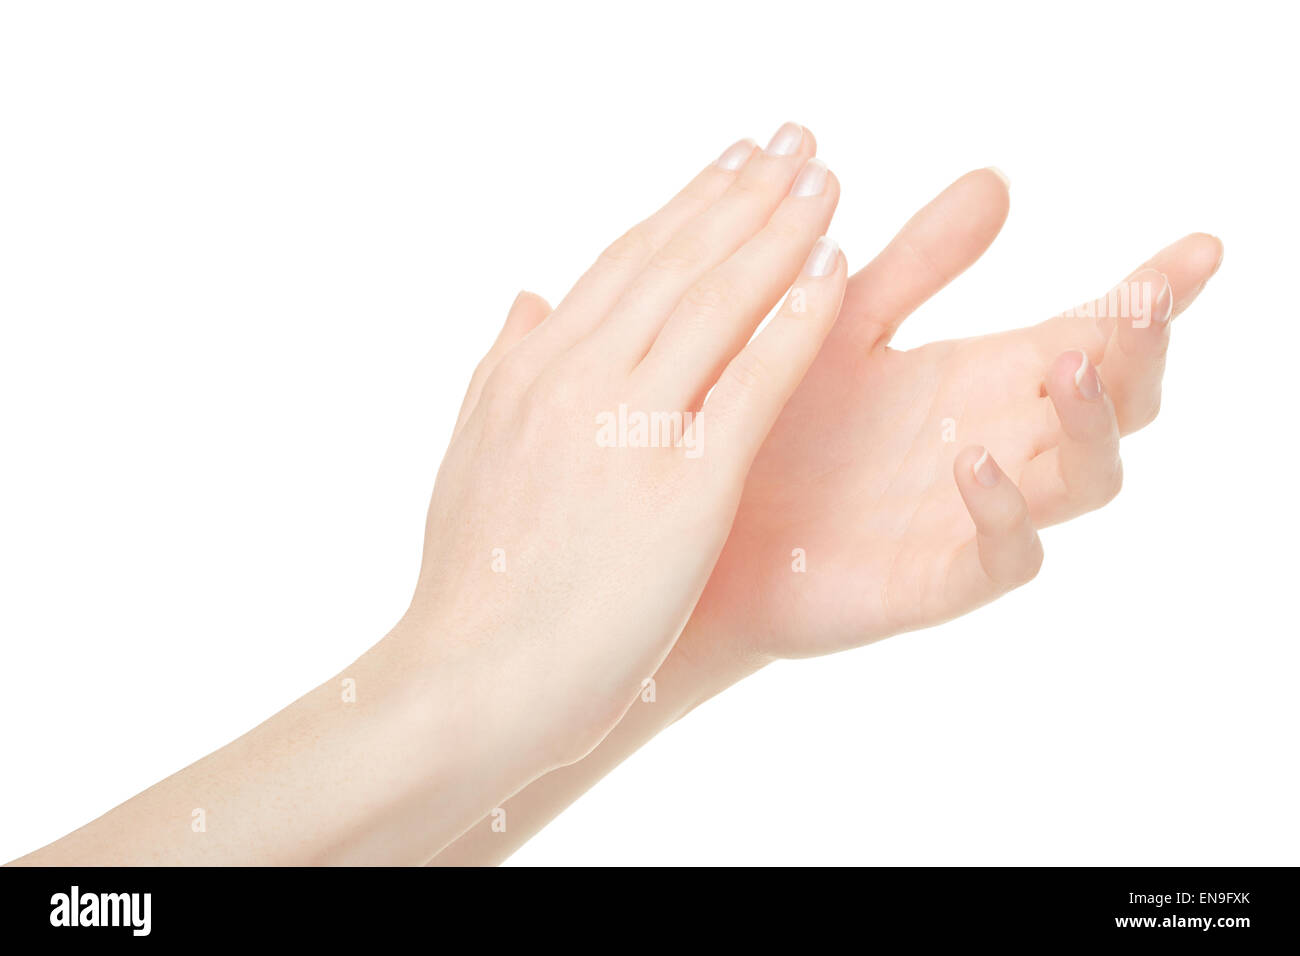 Woman clapping hands, applause Stock Photo